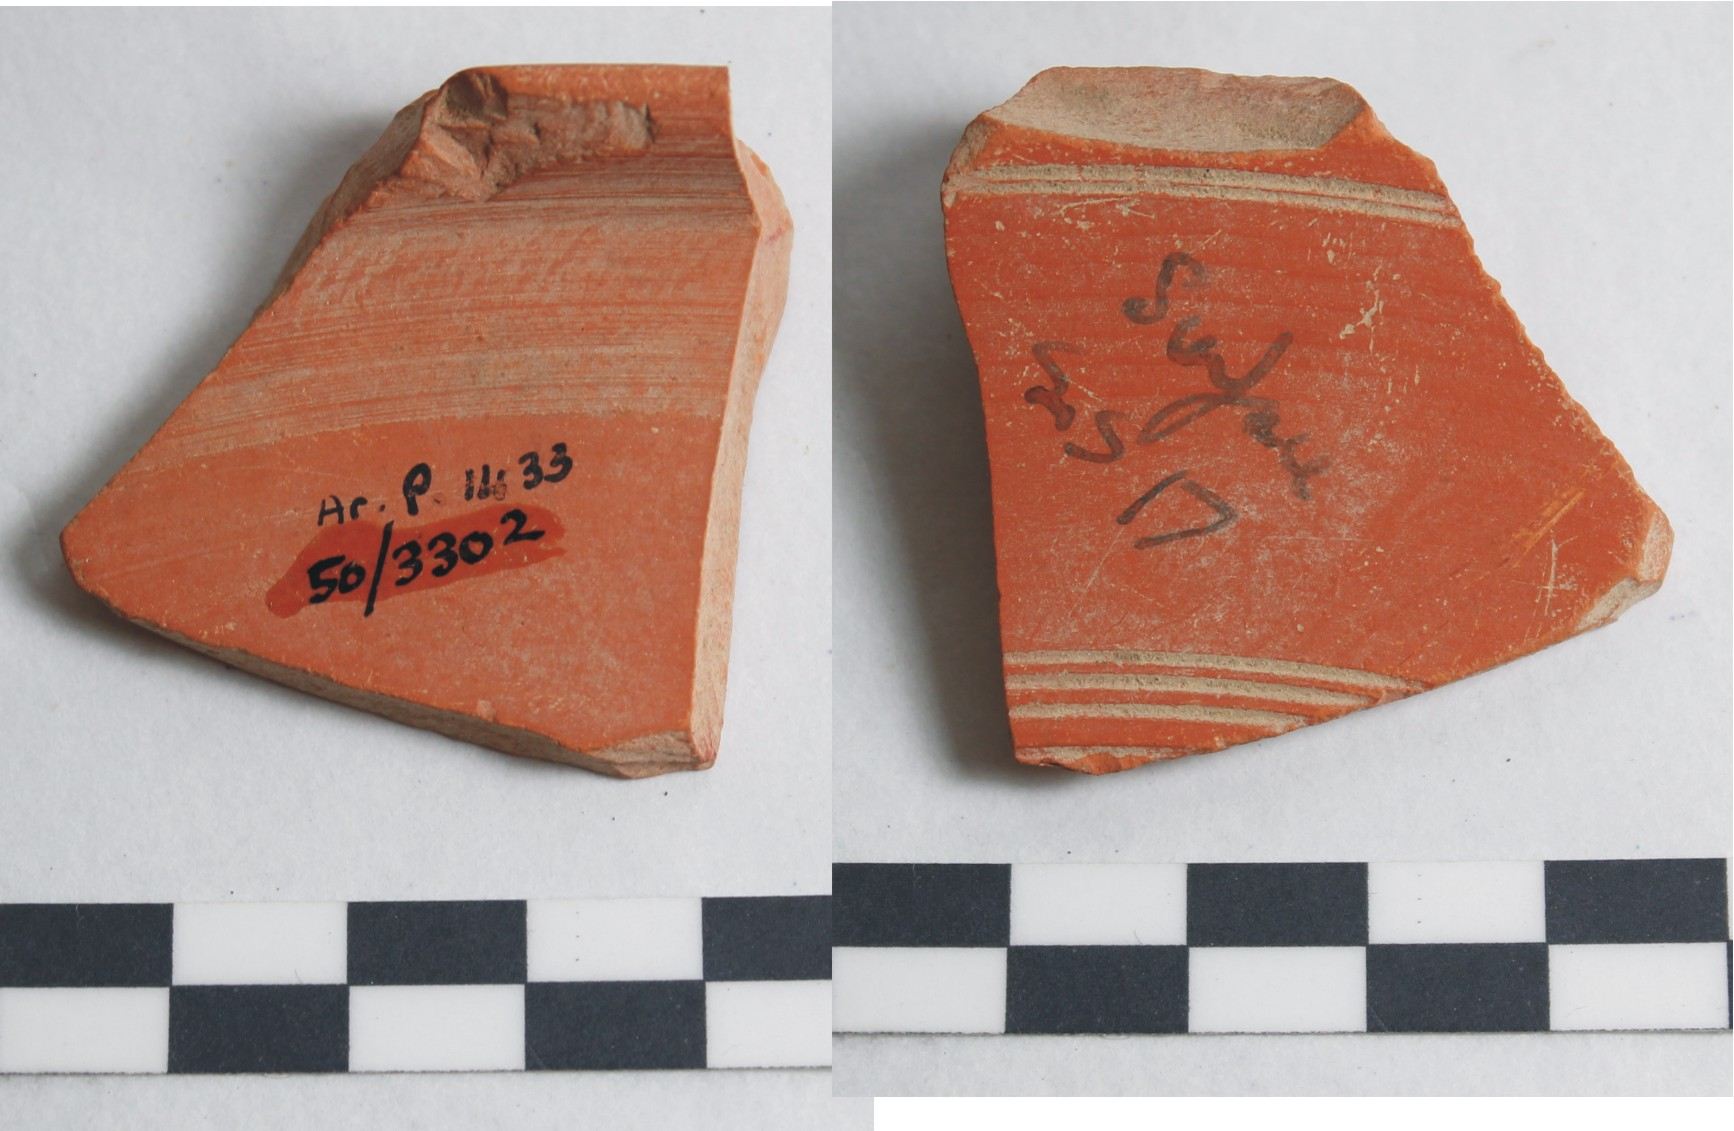 Image for: Base sherd of a pottery vessel